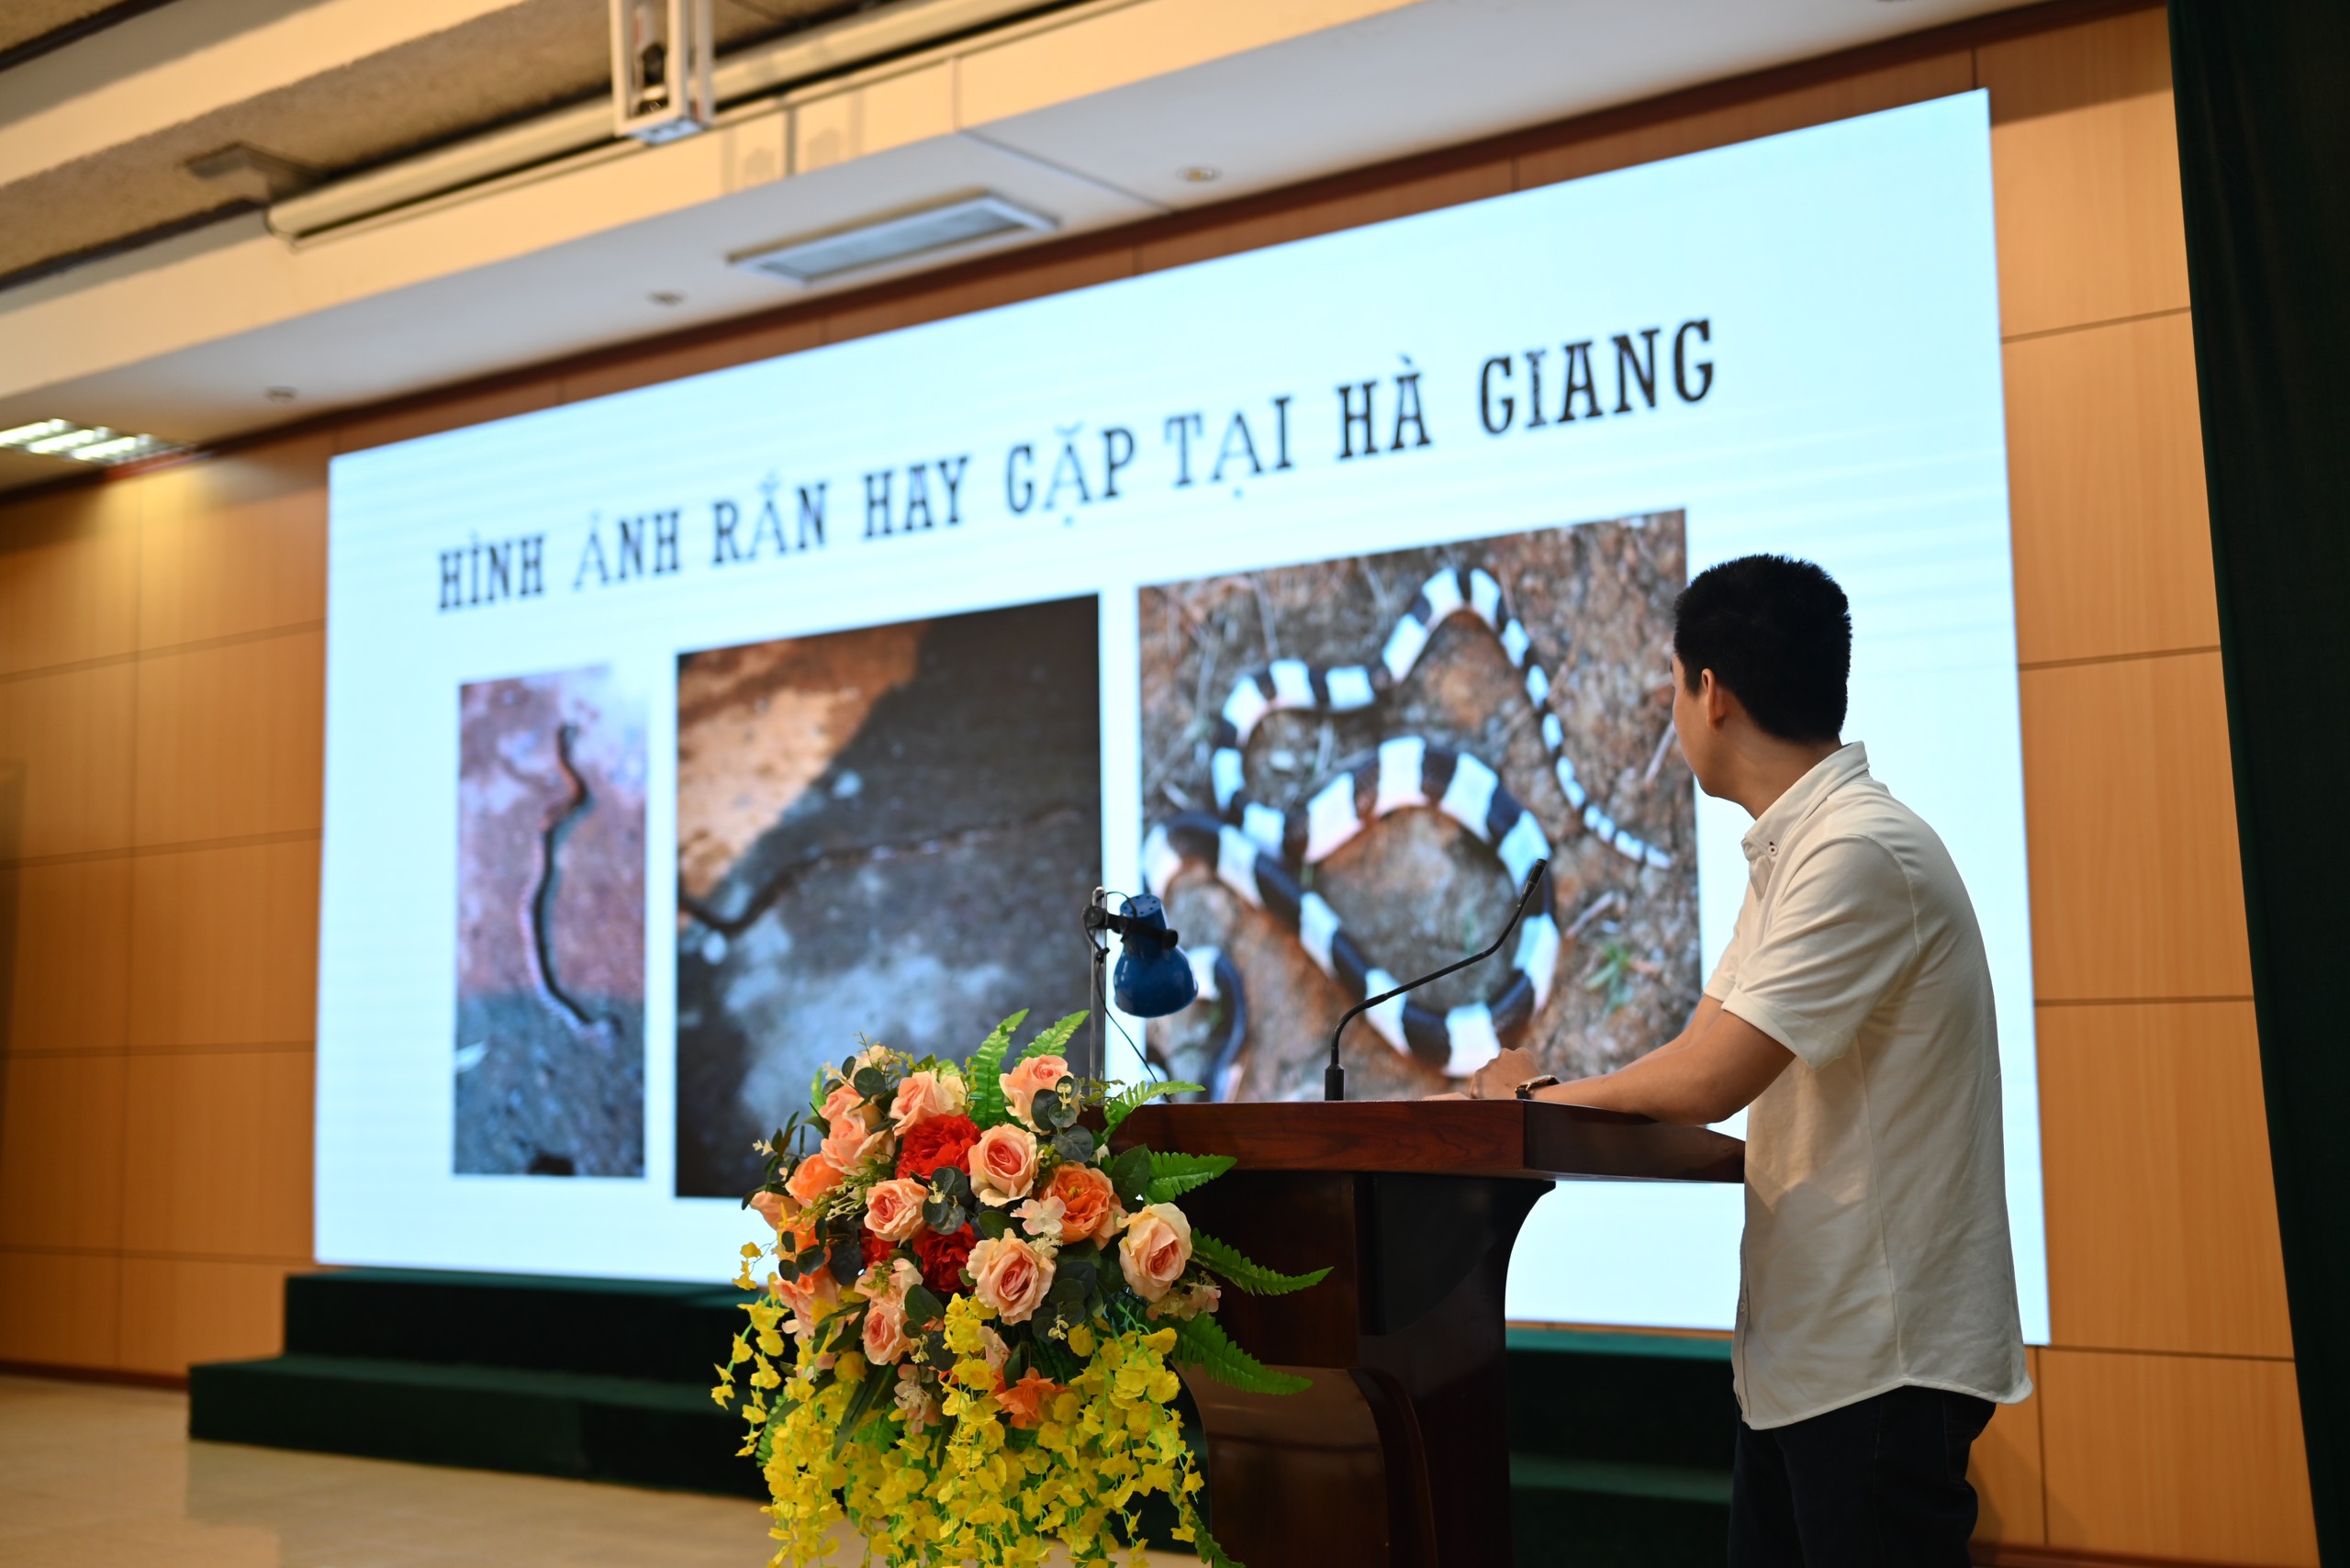 Building Capacity to Save Lives: Trainings on Snakebite Management Expand to Dong Nai, Thua Thien Hue, and Dien Bien Provinces in Vietnam